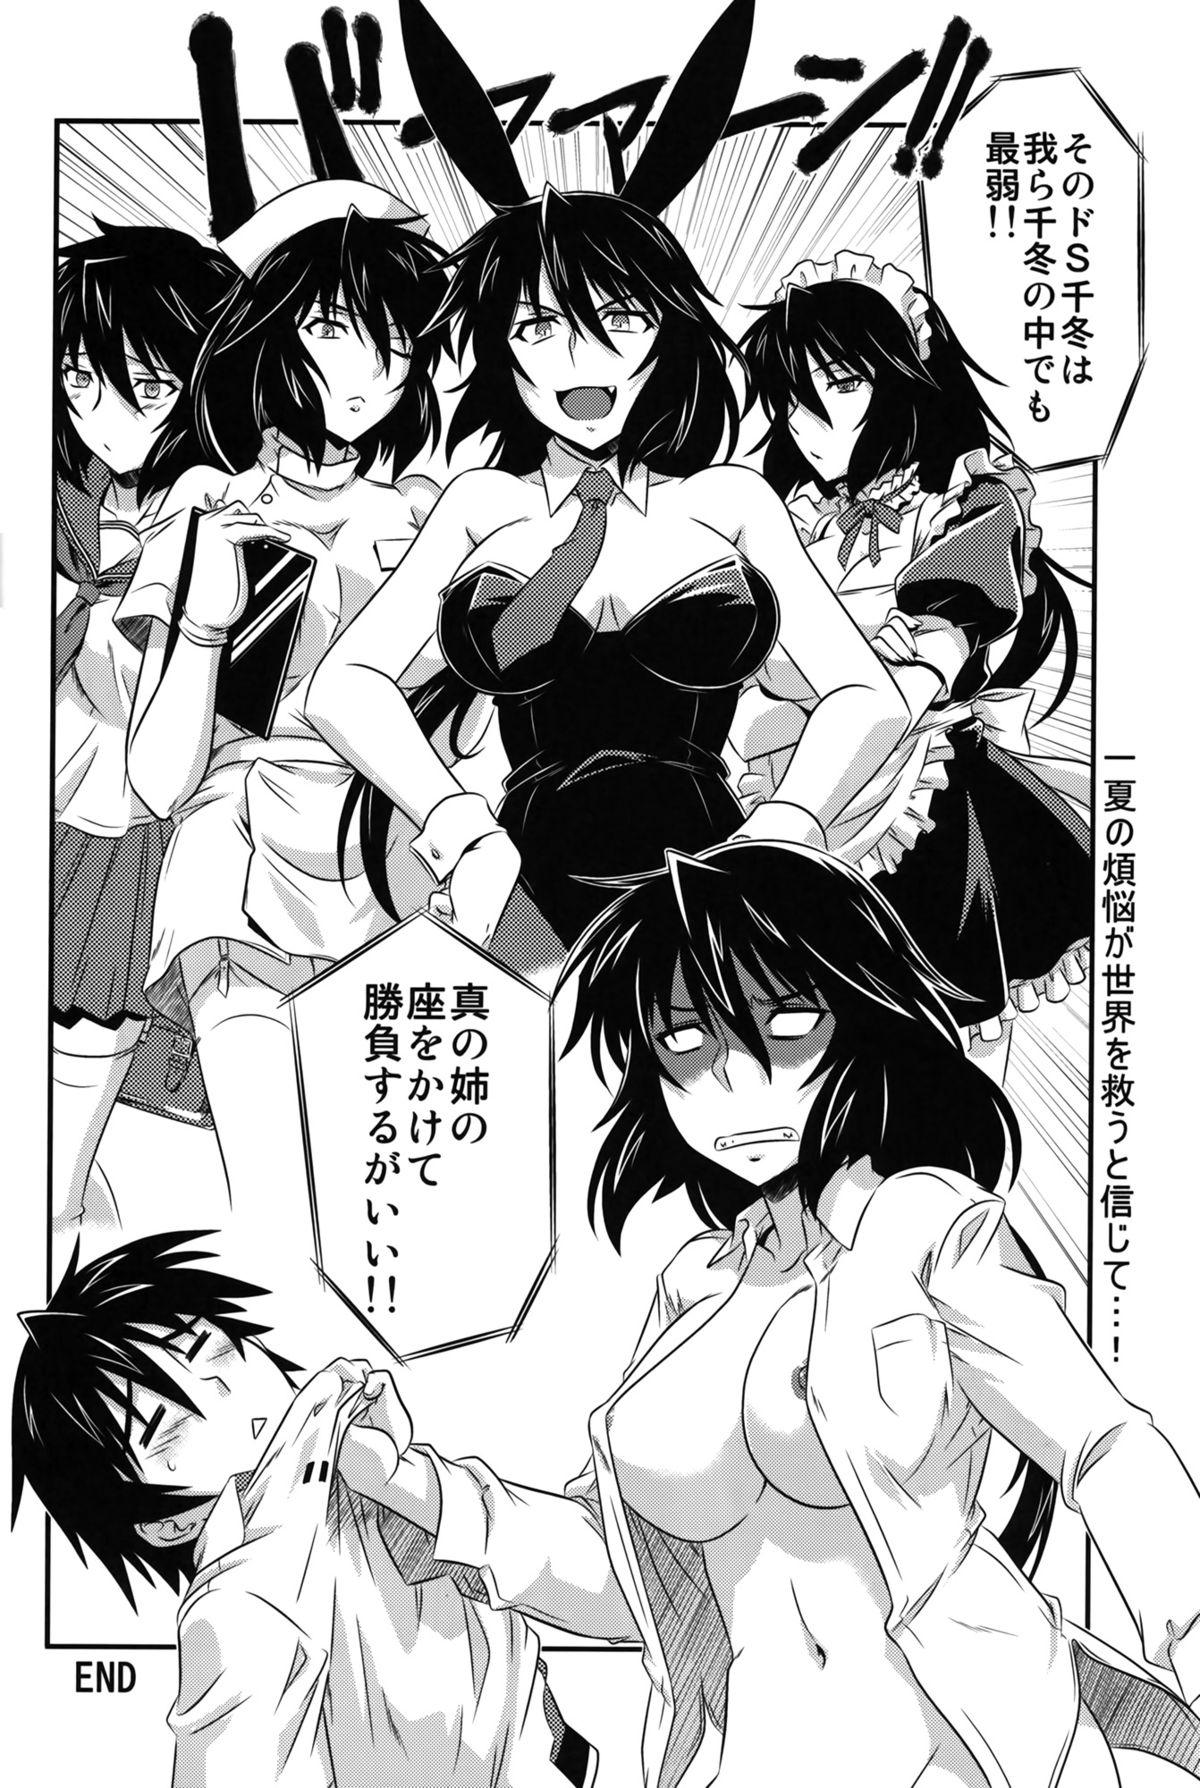 Shoplifter is Incest Strategy 4 - Infinite stratos Girl Fucked Hard - Page 20